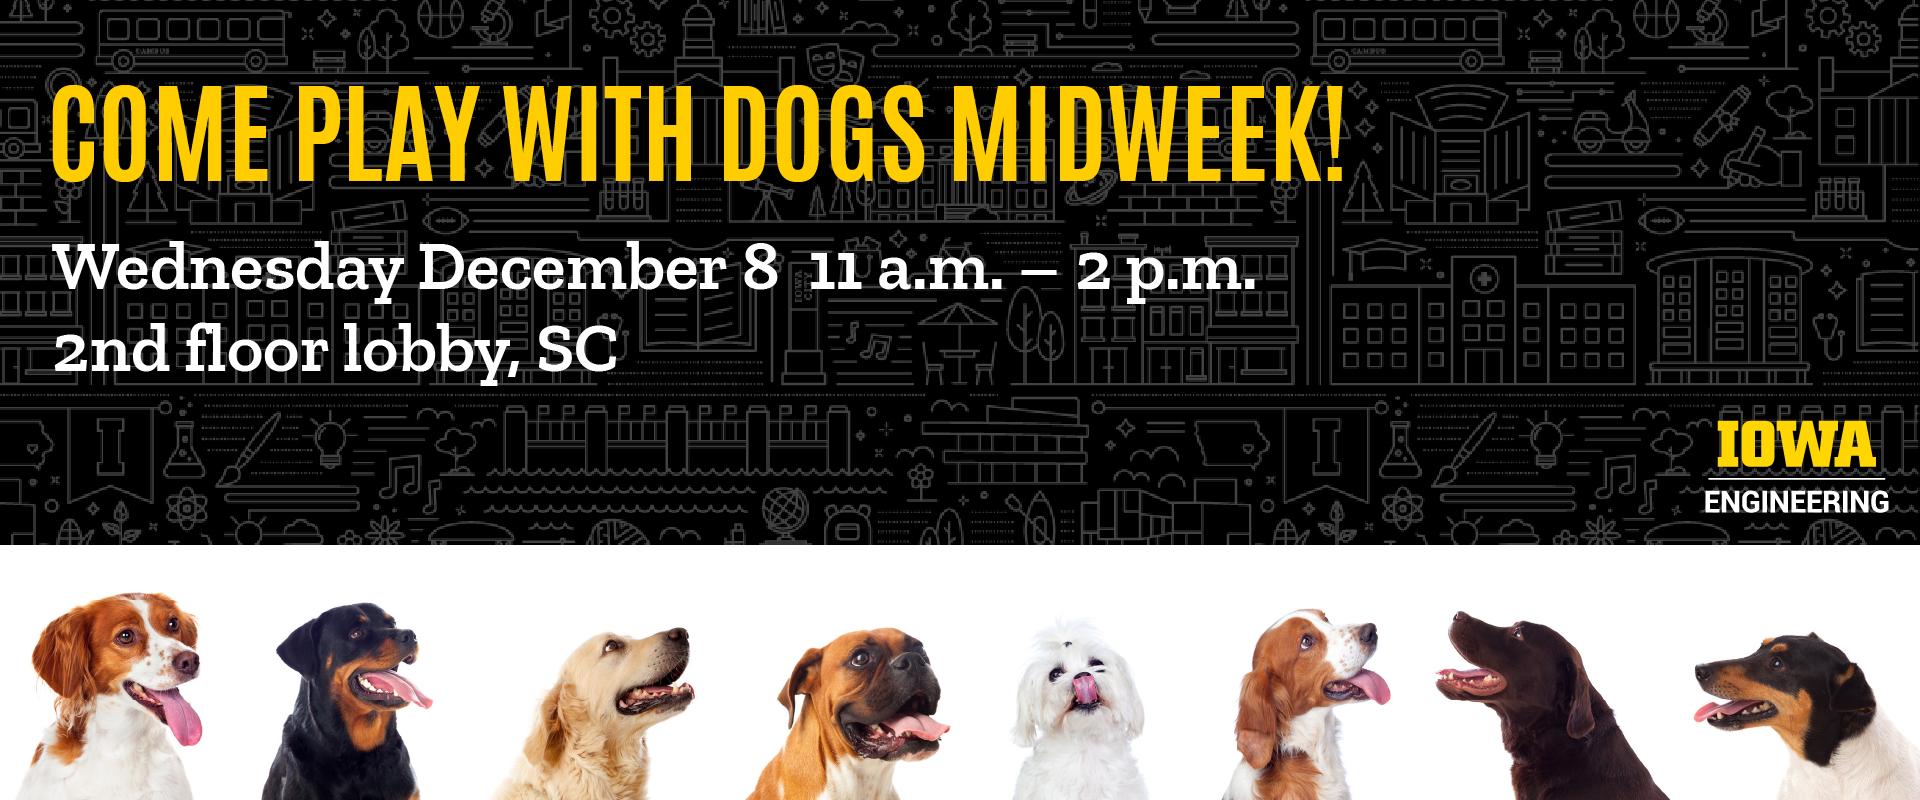 dog therapy on december 8th from 11am - 2pm in the 2nd floor lobby of the seamans center